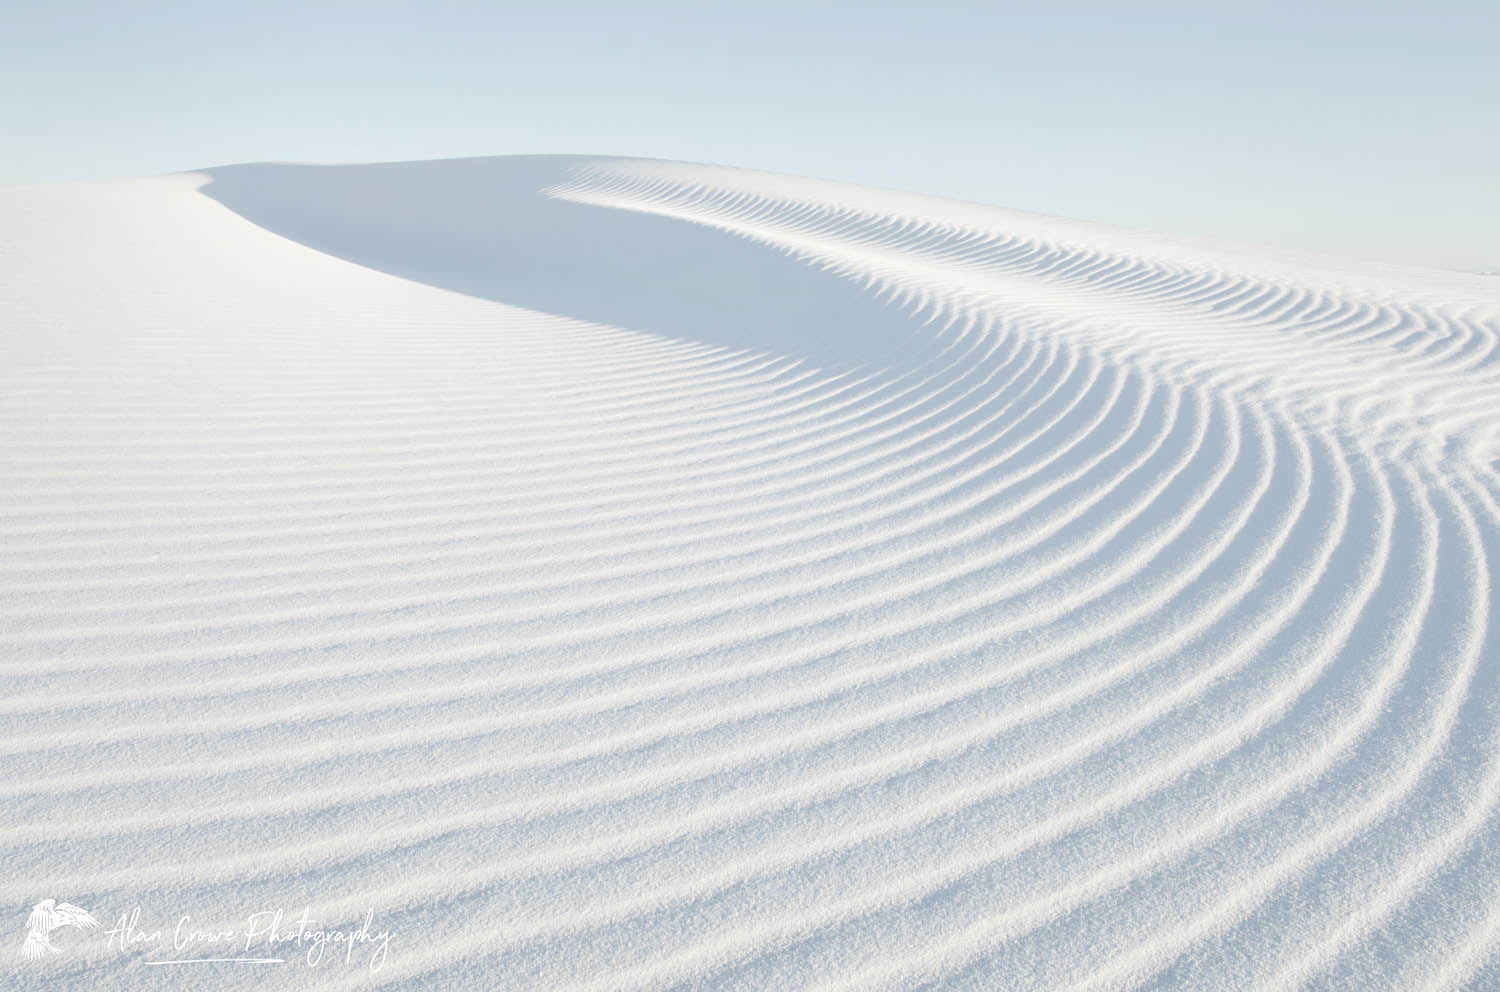 Ripple patterns in gypsum sand dunes, White Sands National Park New Mexico #57049r